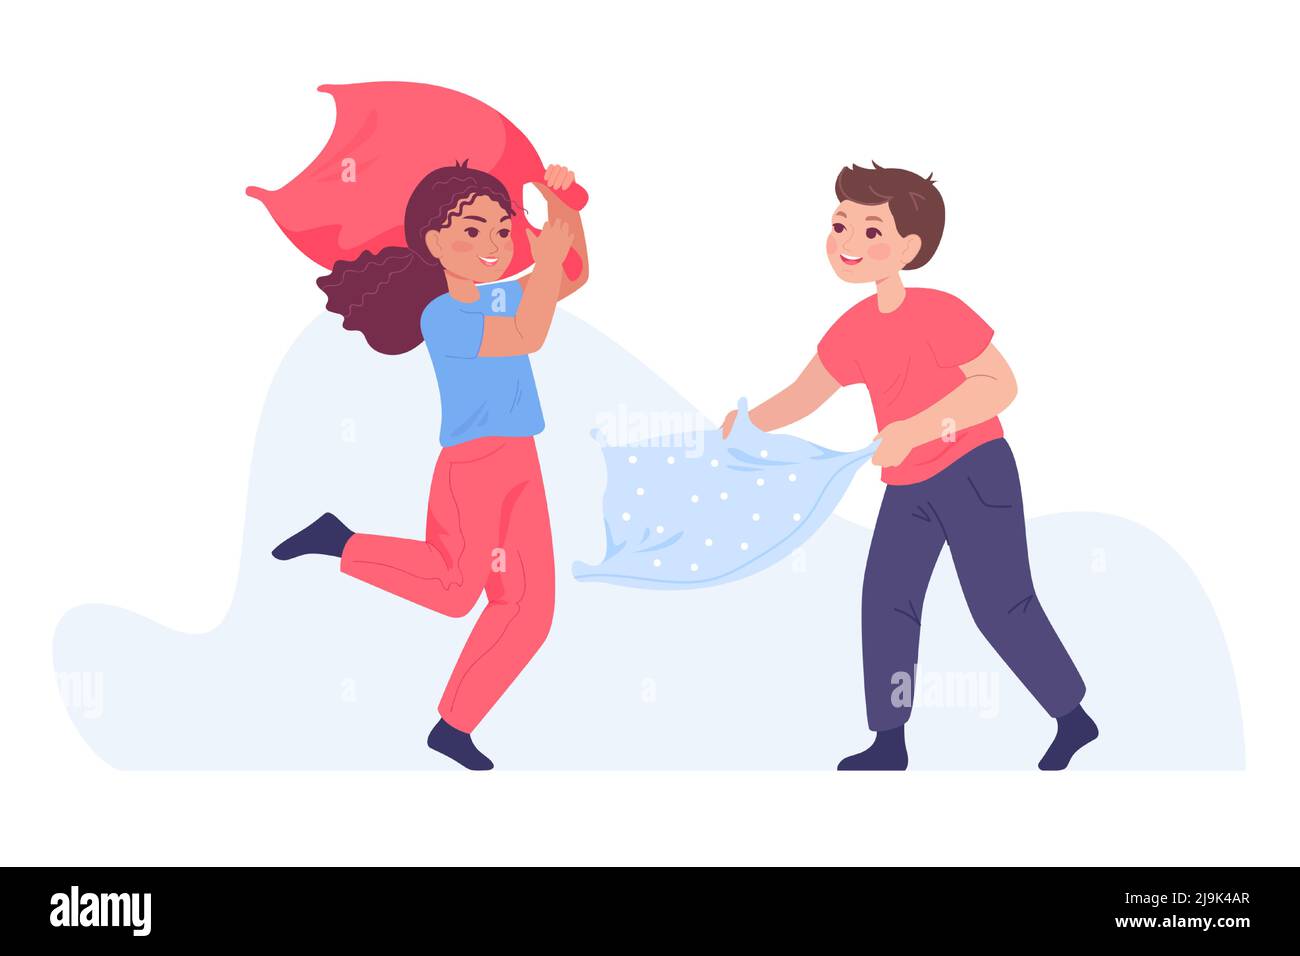 Adorable kids having fun together while fighting using pillows. Boy and girl characters having pillow fight in pajamas flat vector illustration. Child Stock Vector